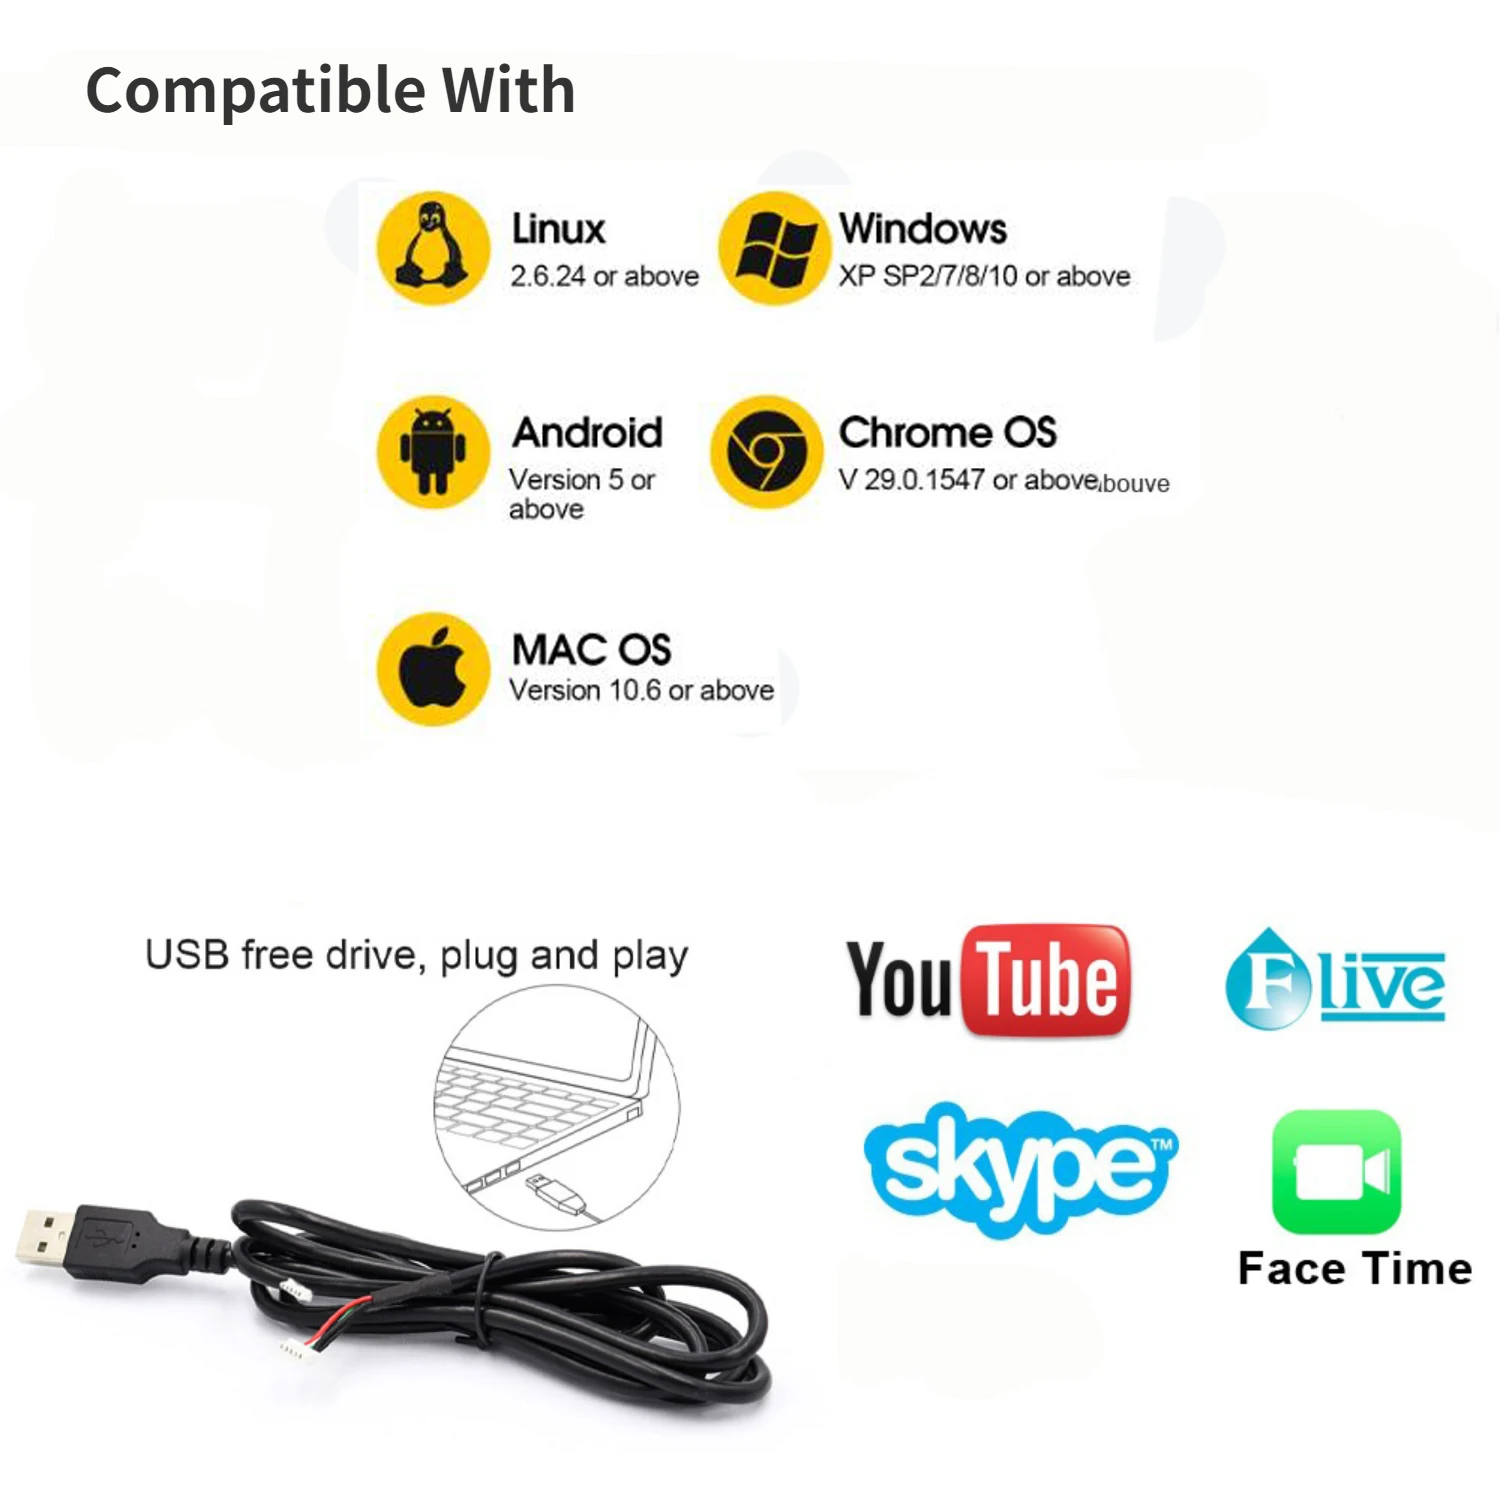 HD 4K Camera Module 25FPS,USB Plug And Play,IMX415 3840x2160 Webcam 8MP For Windows Android Linux  Raspberry Pie